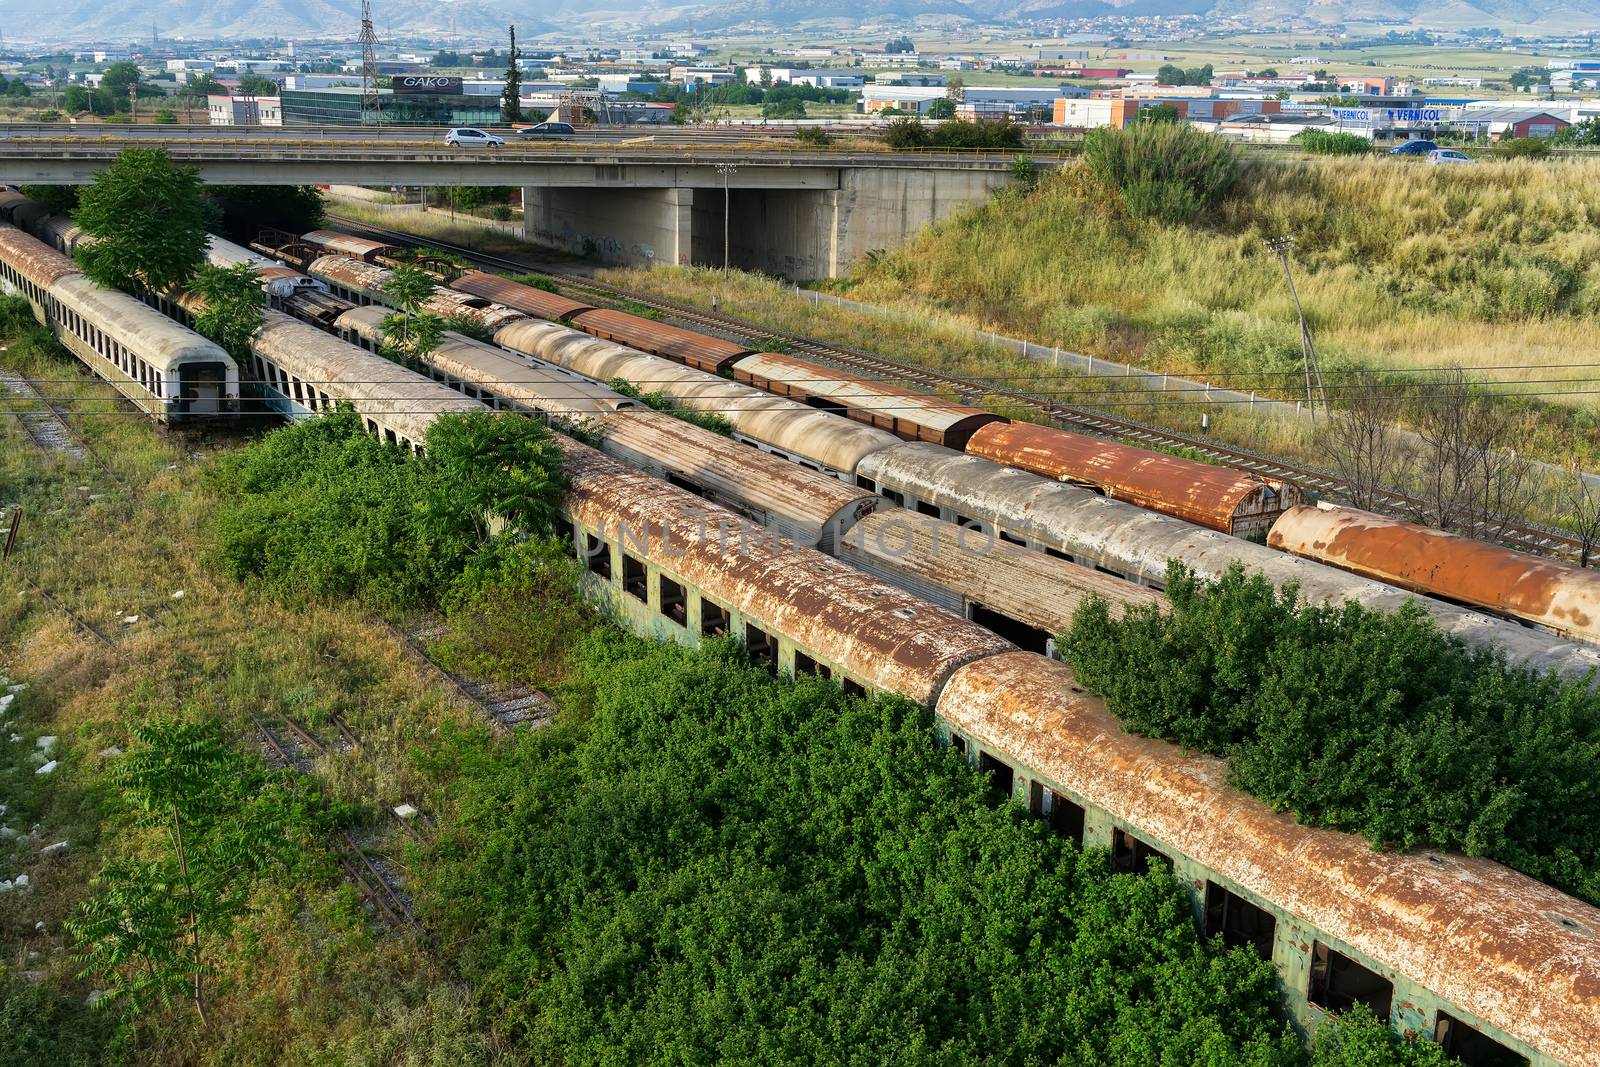 Aerial view of cemetery trains in Nea Ionia, Thessaloniki by ververidis